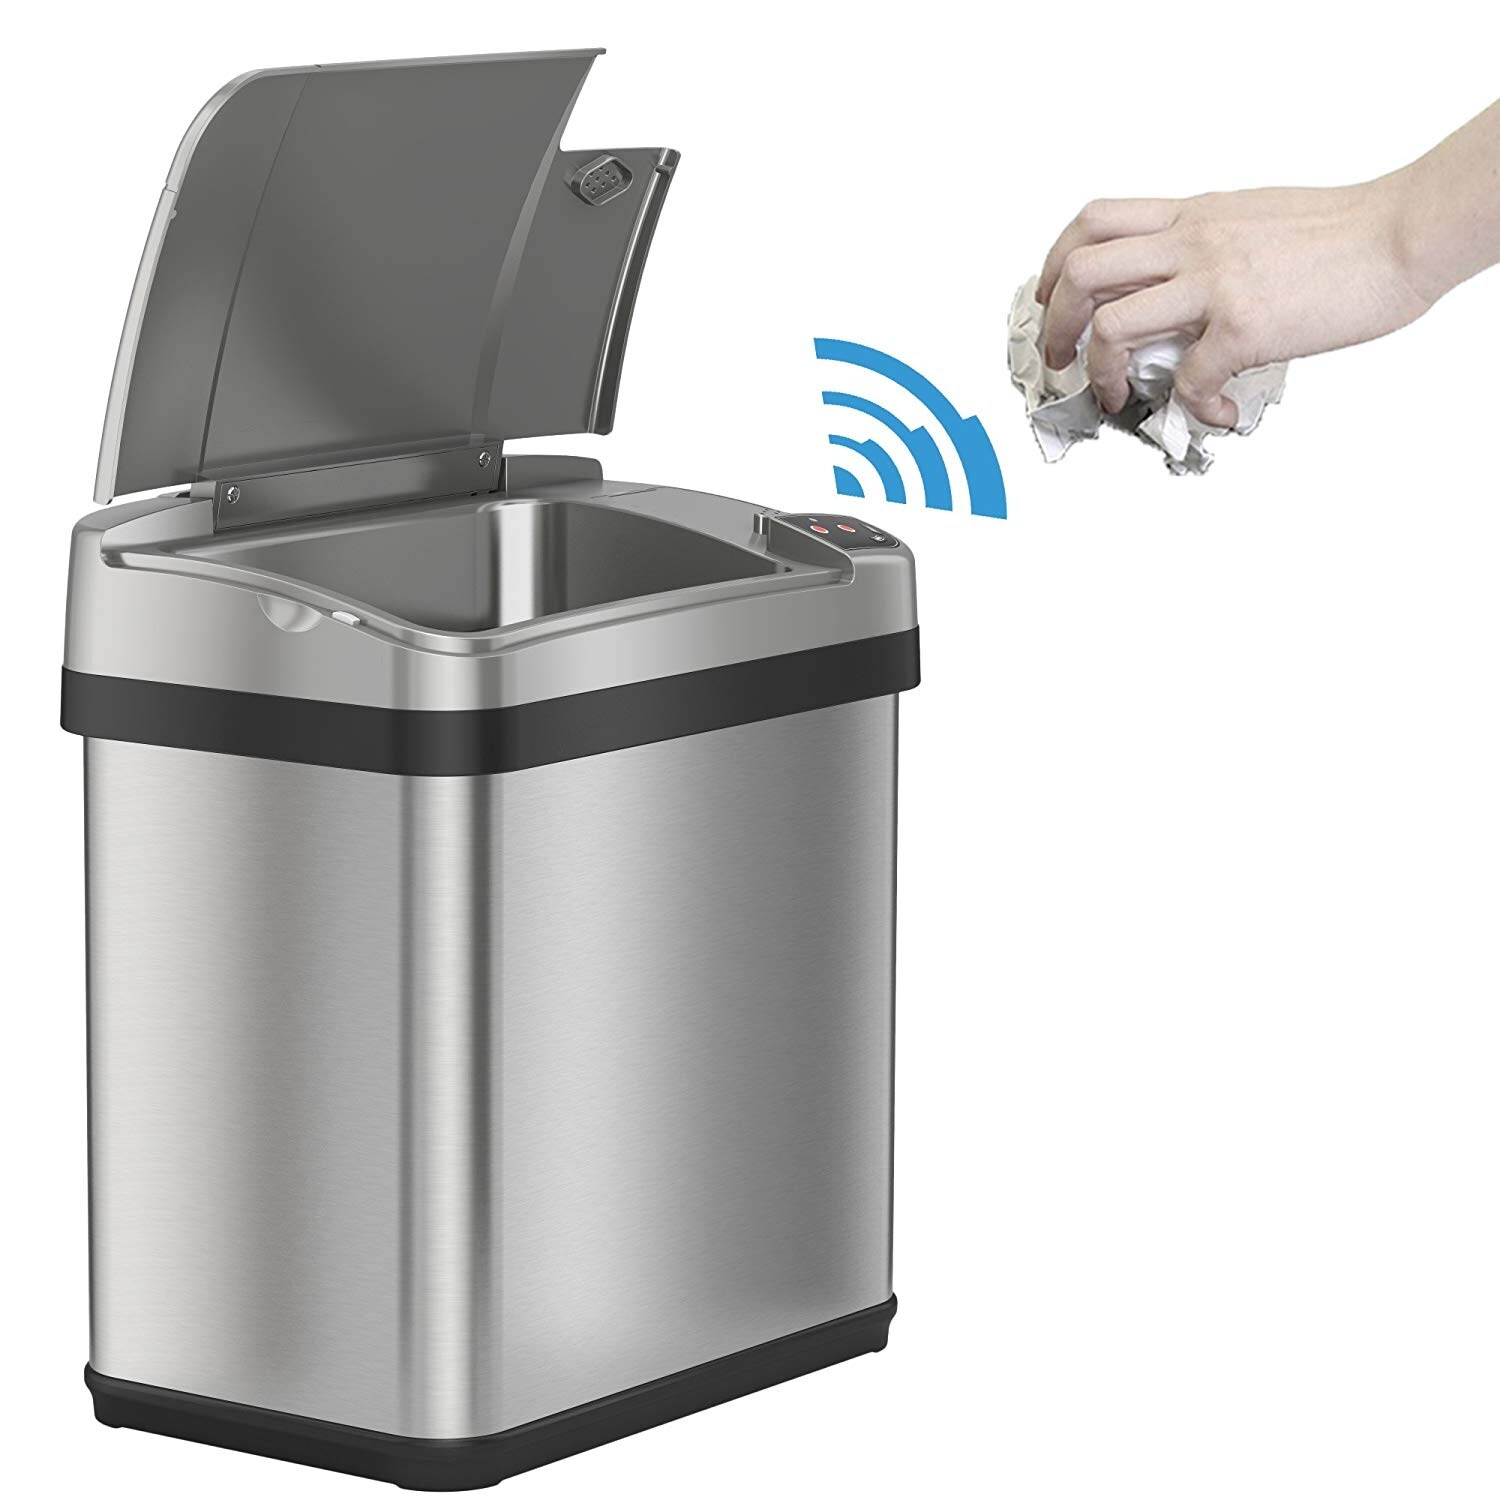 iTouchless 8 Gallon Touchless Sensor Kitchen Trash Can with Odor Control  System, Stainless Steel, Round Garbage Bin for Home or Office